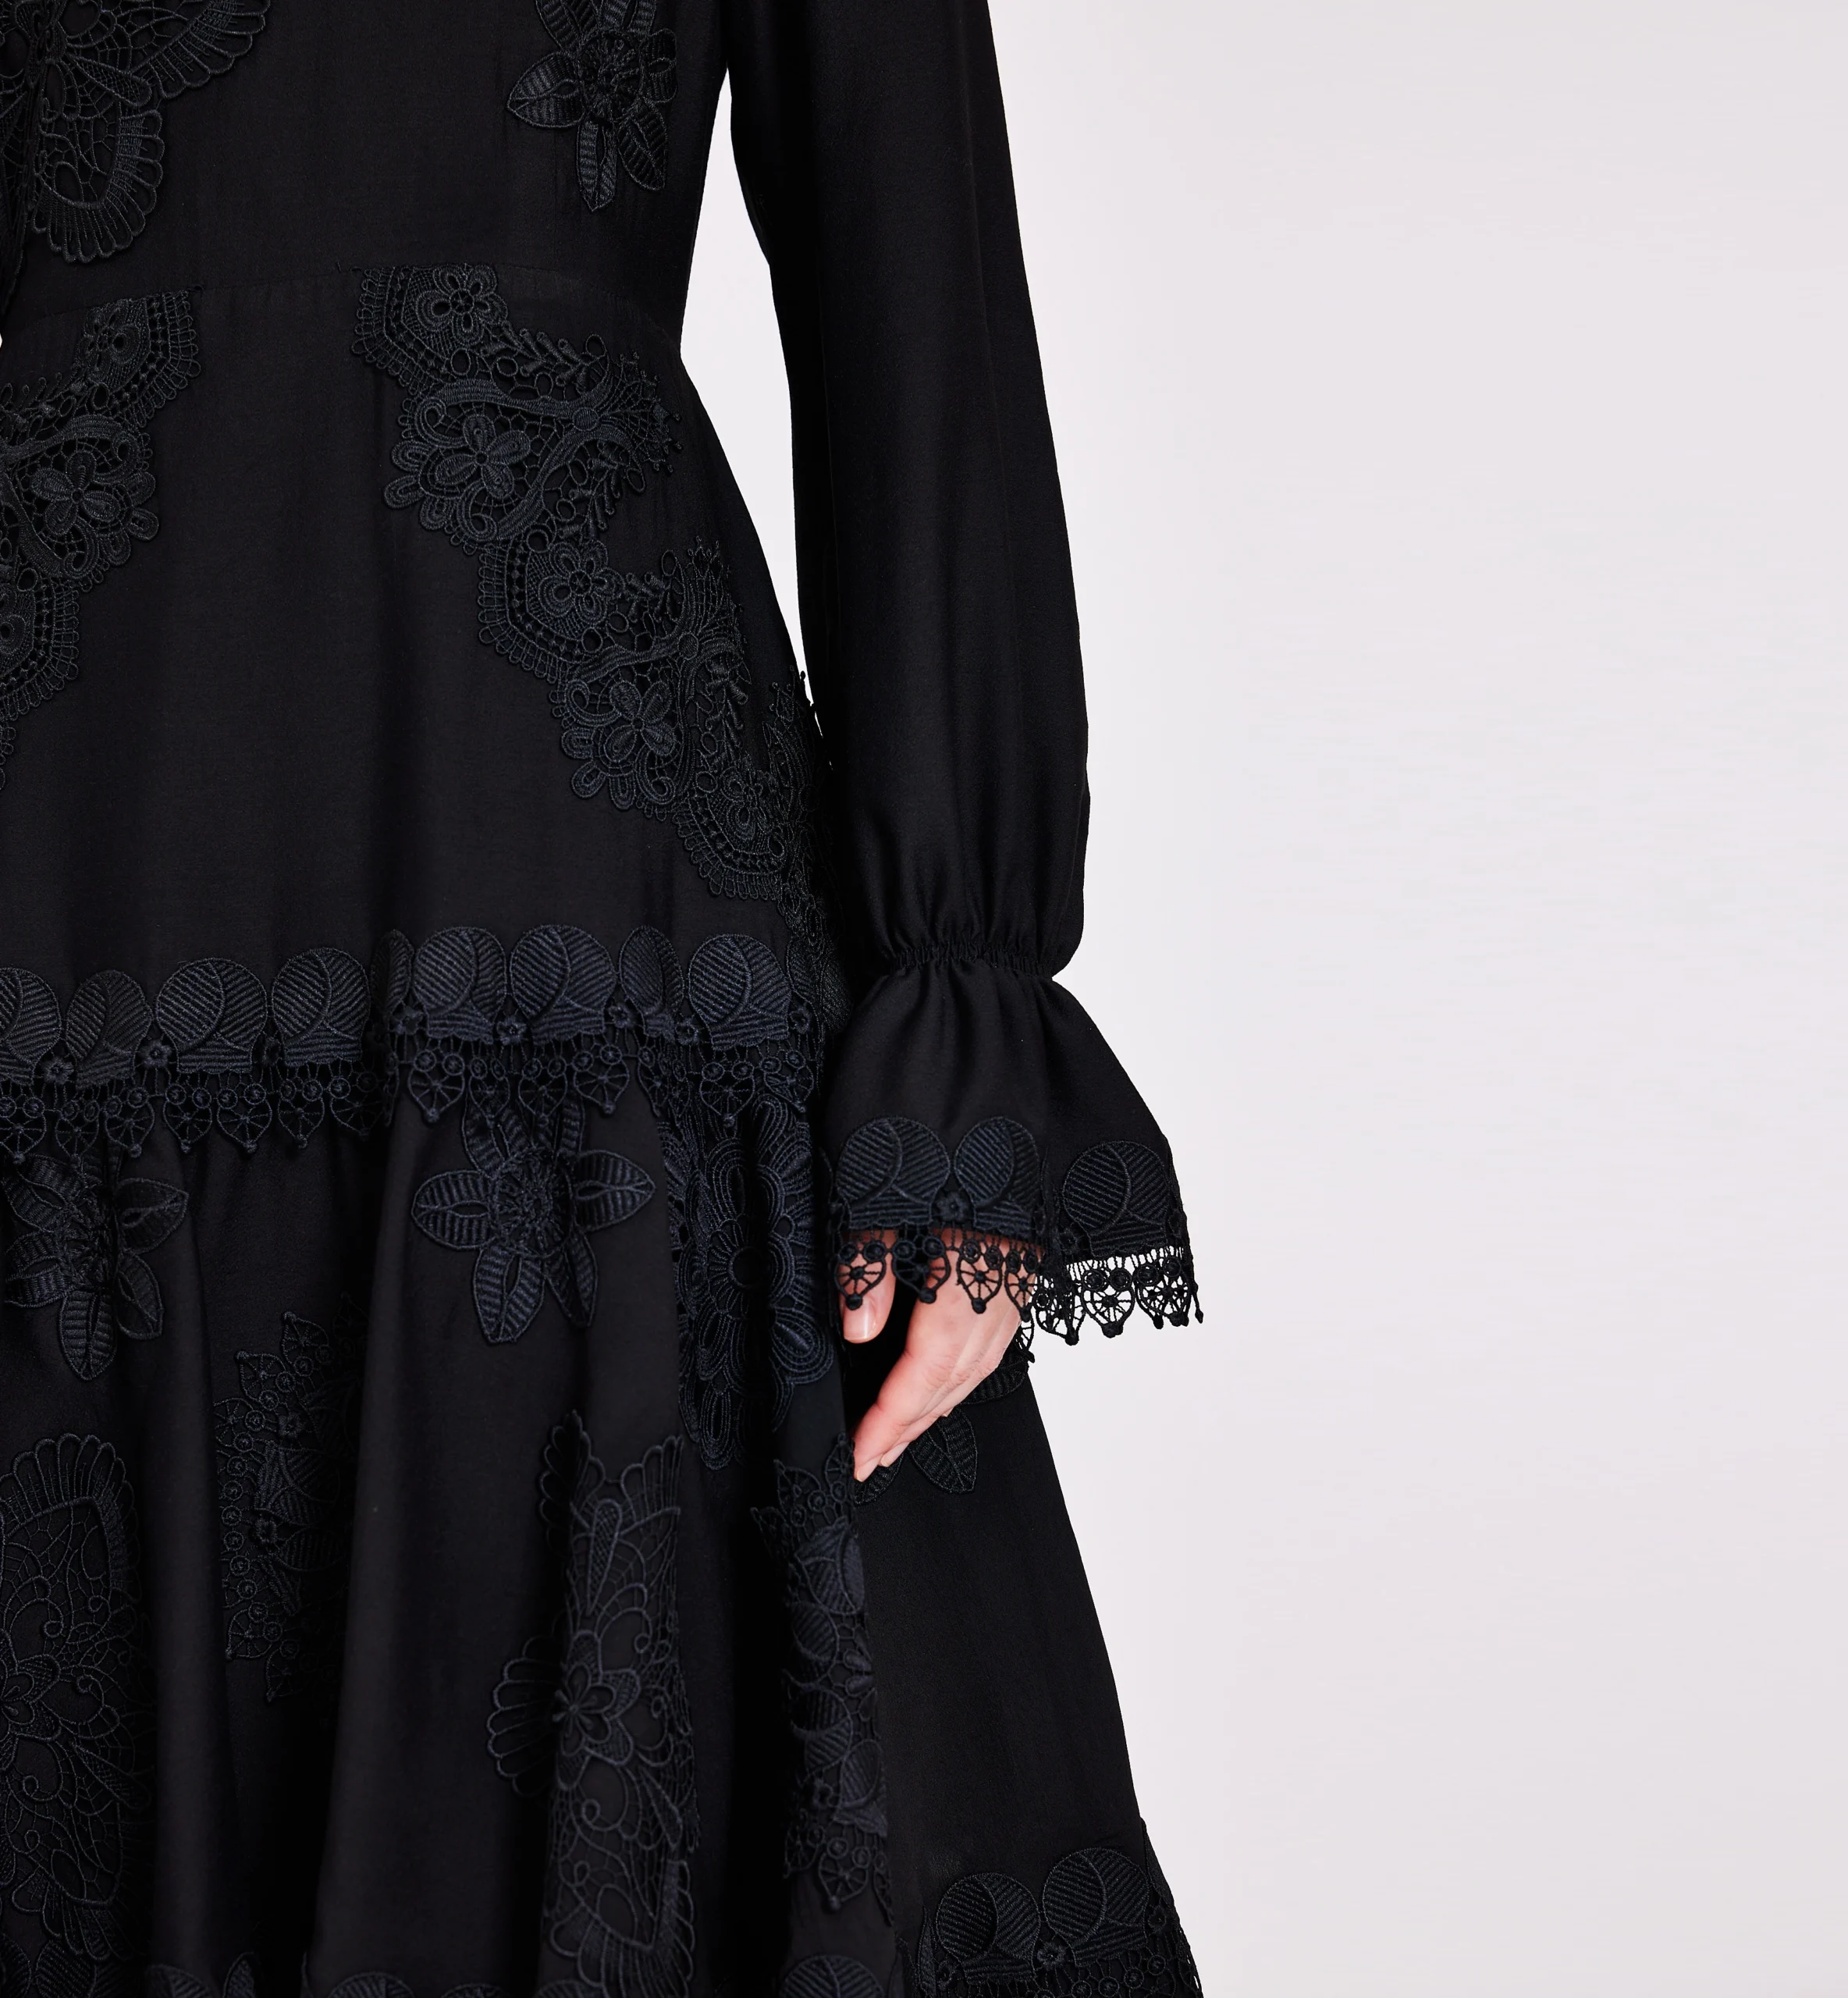 Silk with flowers appliques and lace ribbons dress, black